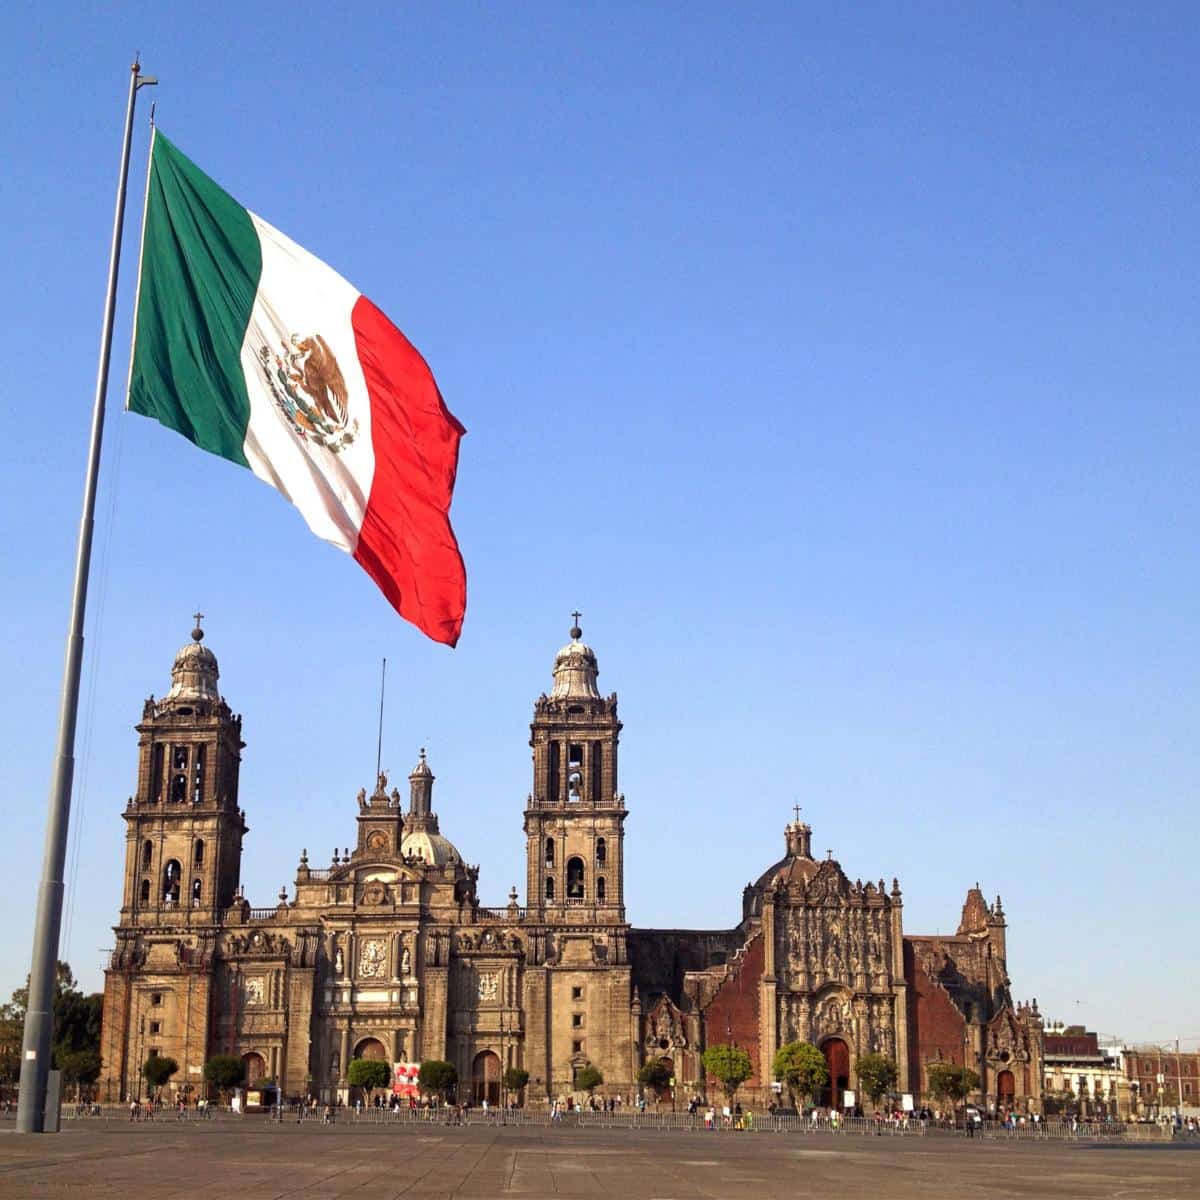 Popular building in Mexico with a Mexican flag flying in front